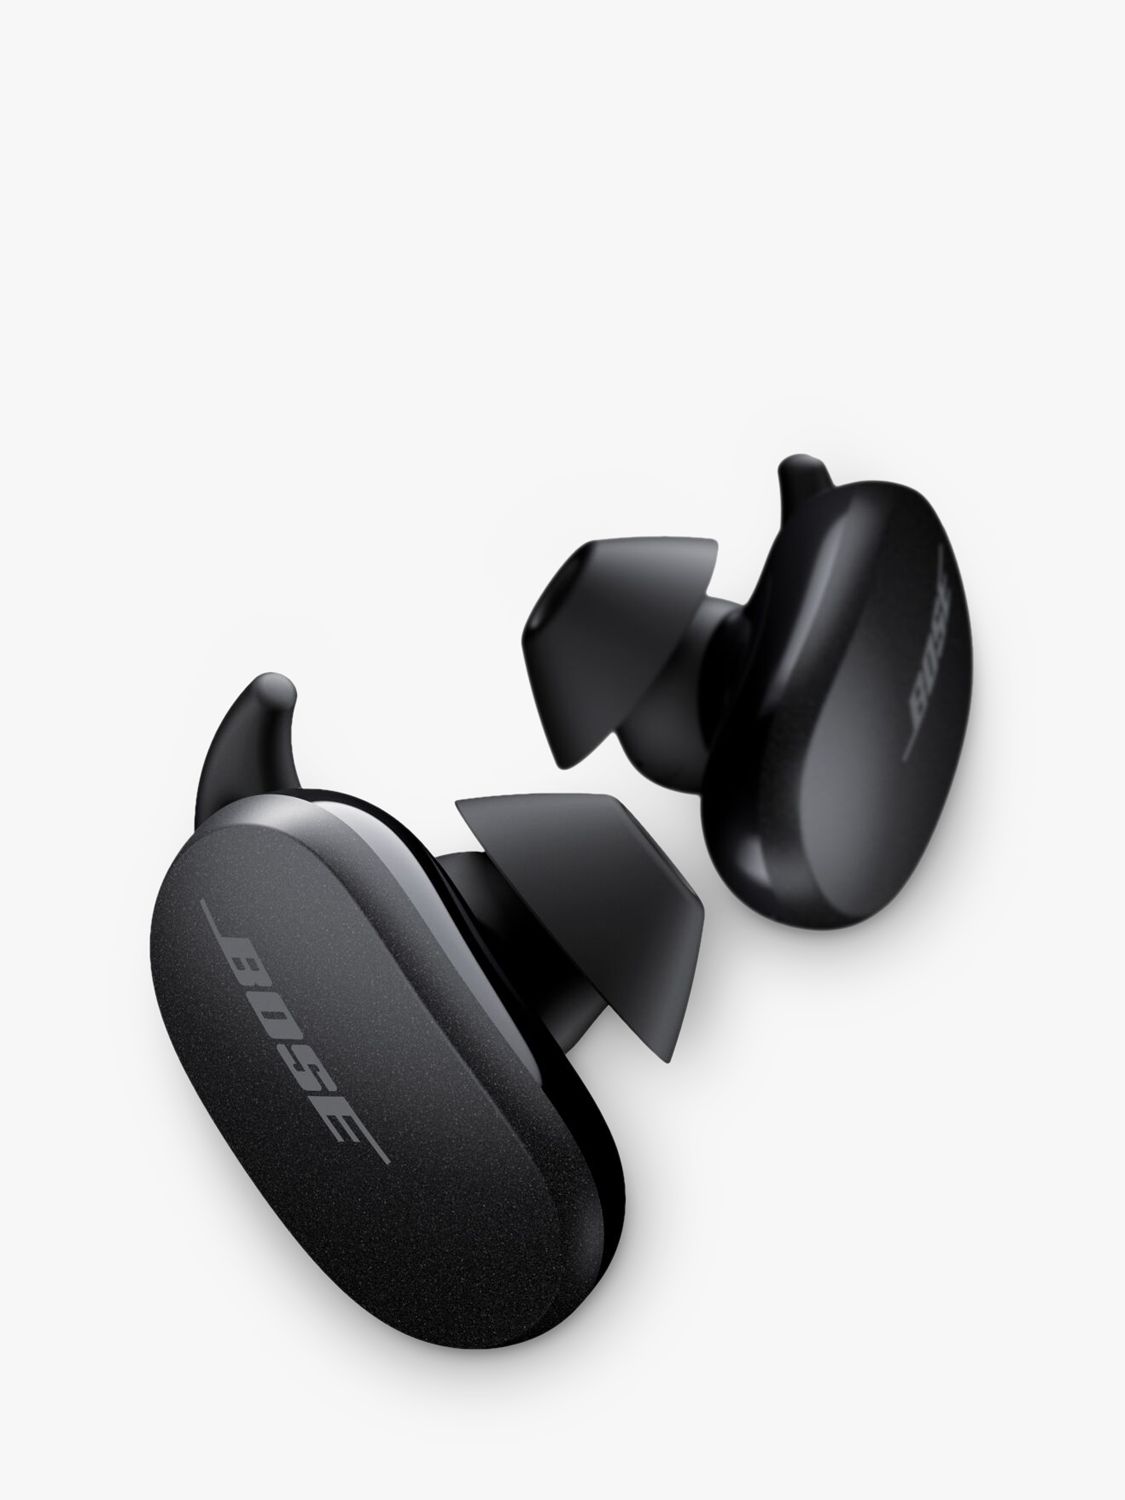 Bose Quietcomfort Earbuds Noise Cancelling True Wireless Sweat Weather Resistant Bluetooth In Ear Headphones With Mic Remote